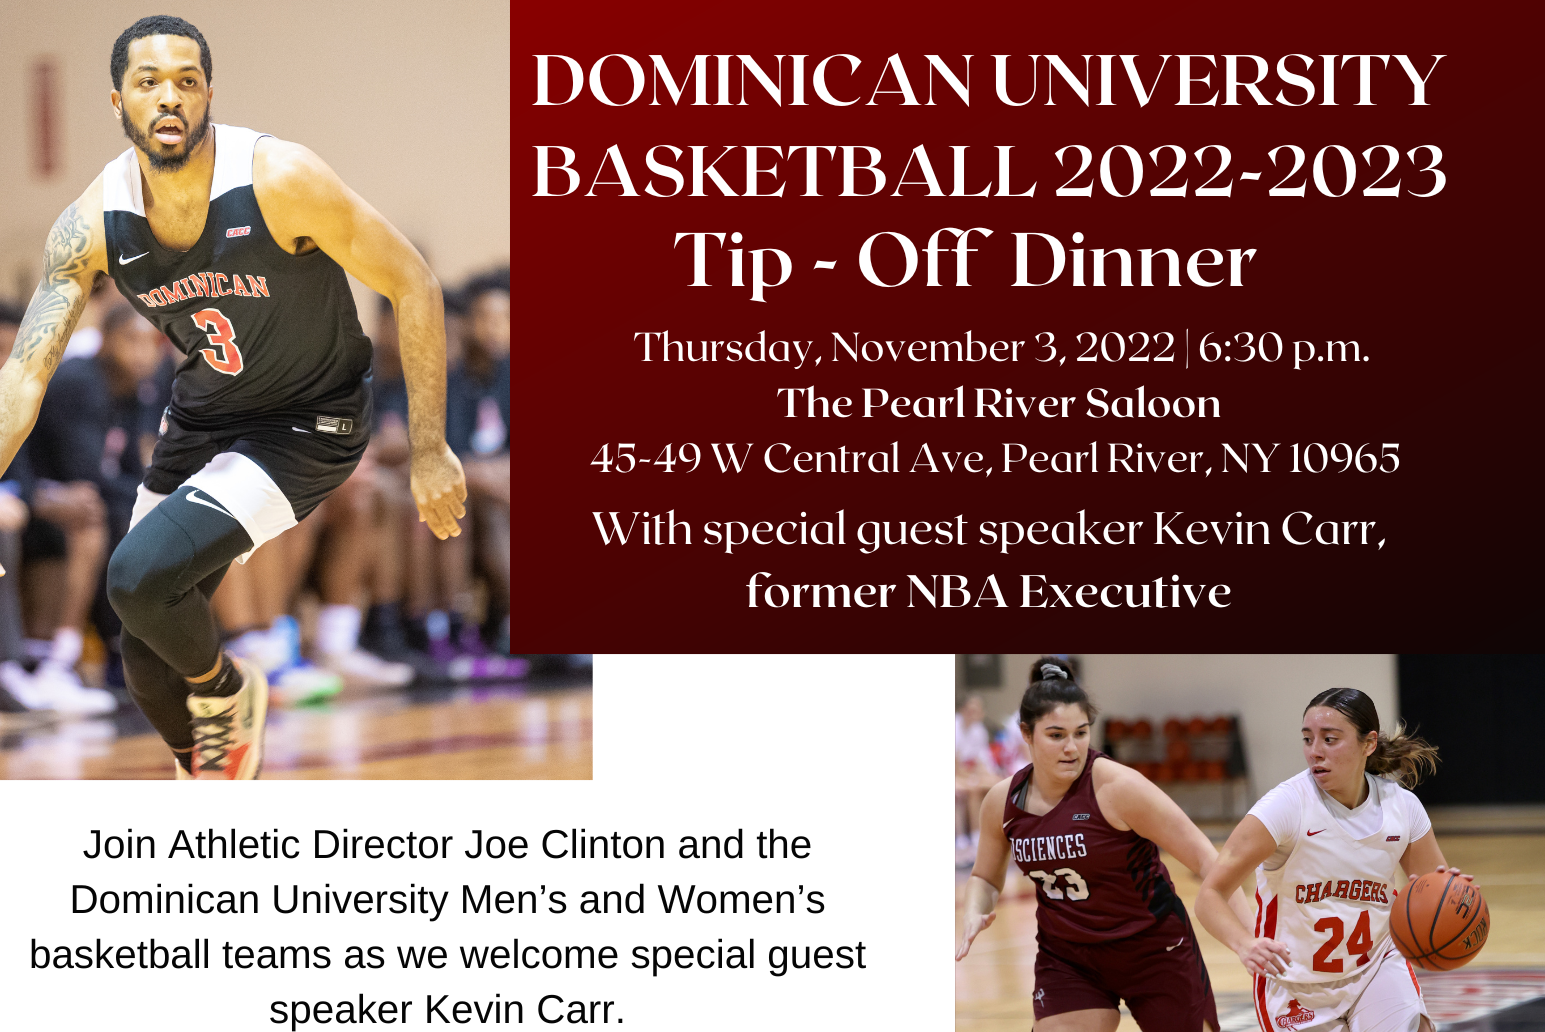 MEN'S AND WOMEN'S BASKETBALL TO HOLD ANNUAL TIP-OFF DINNER